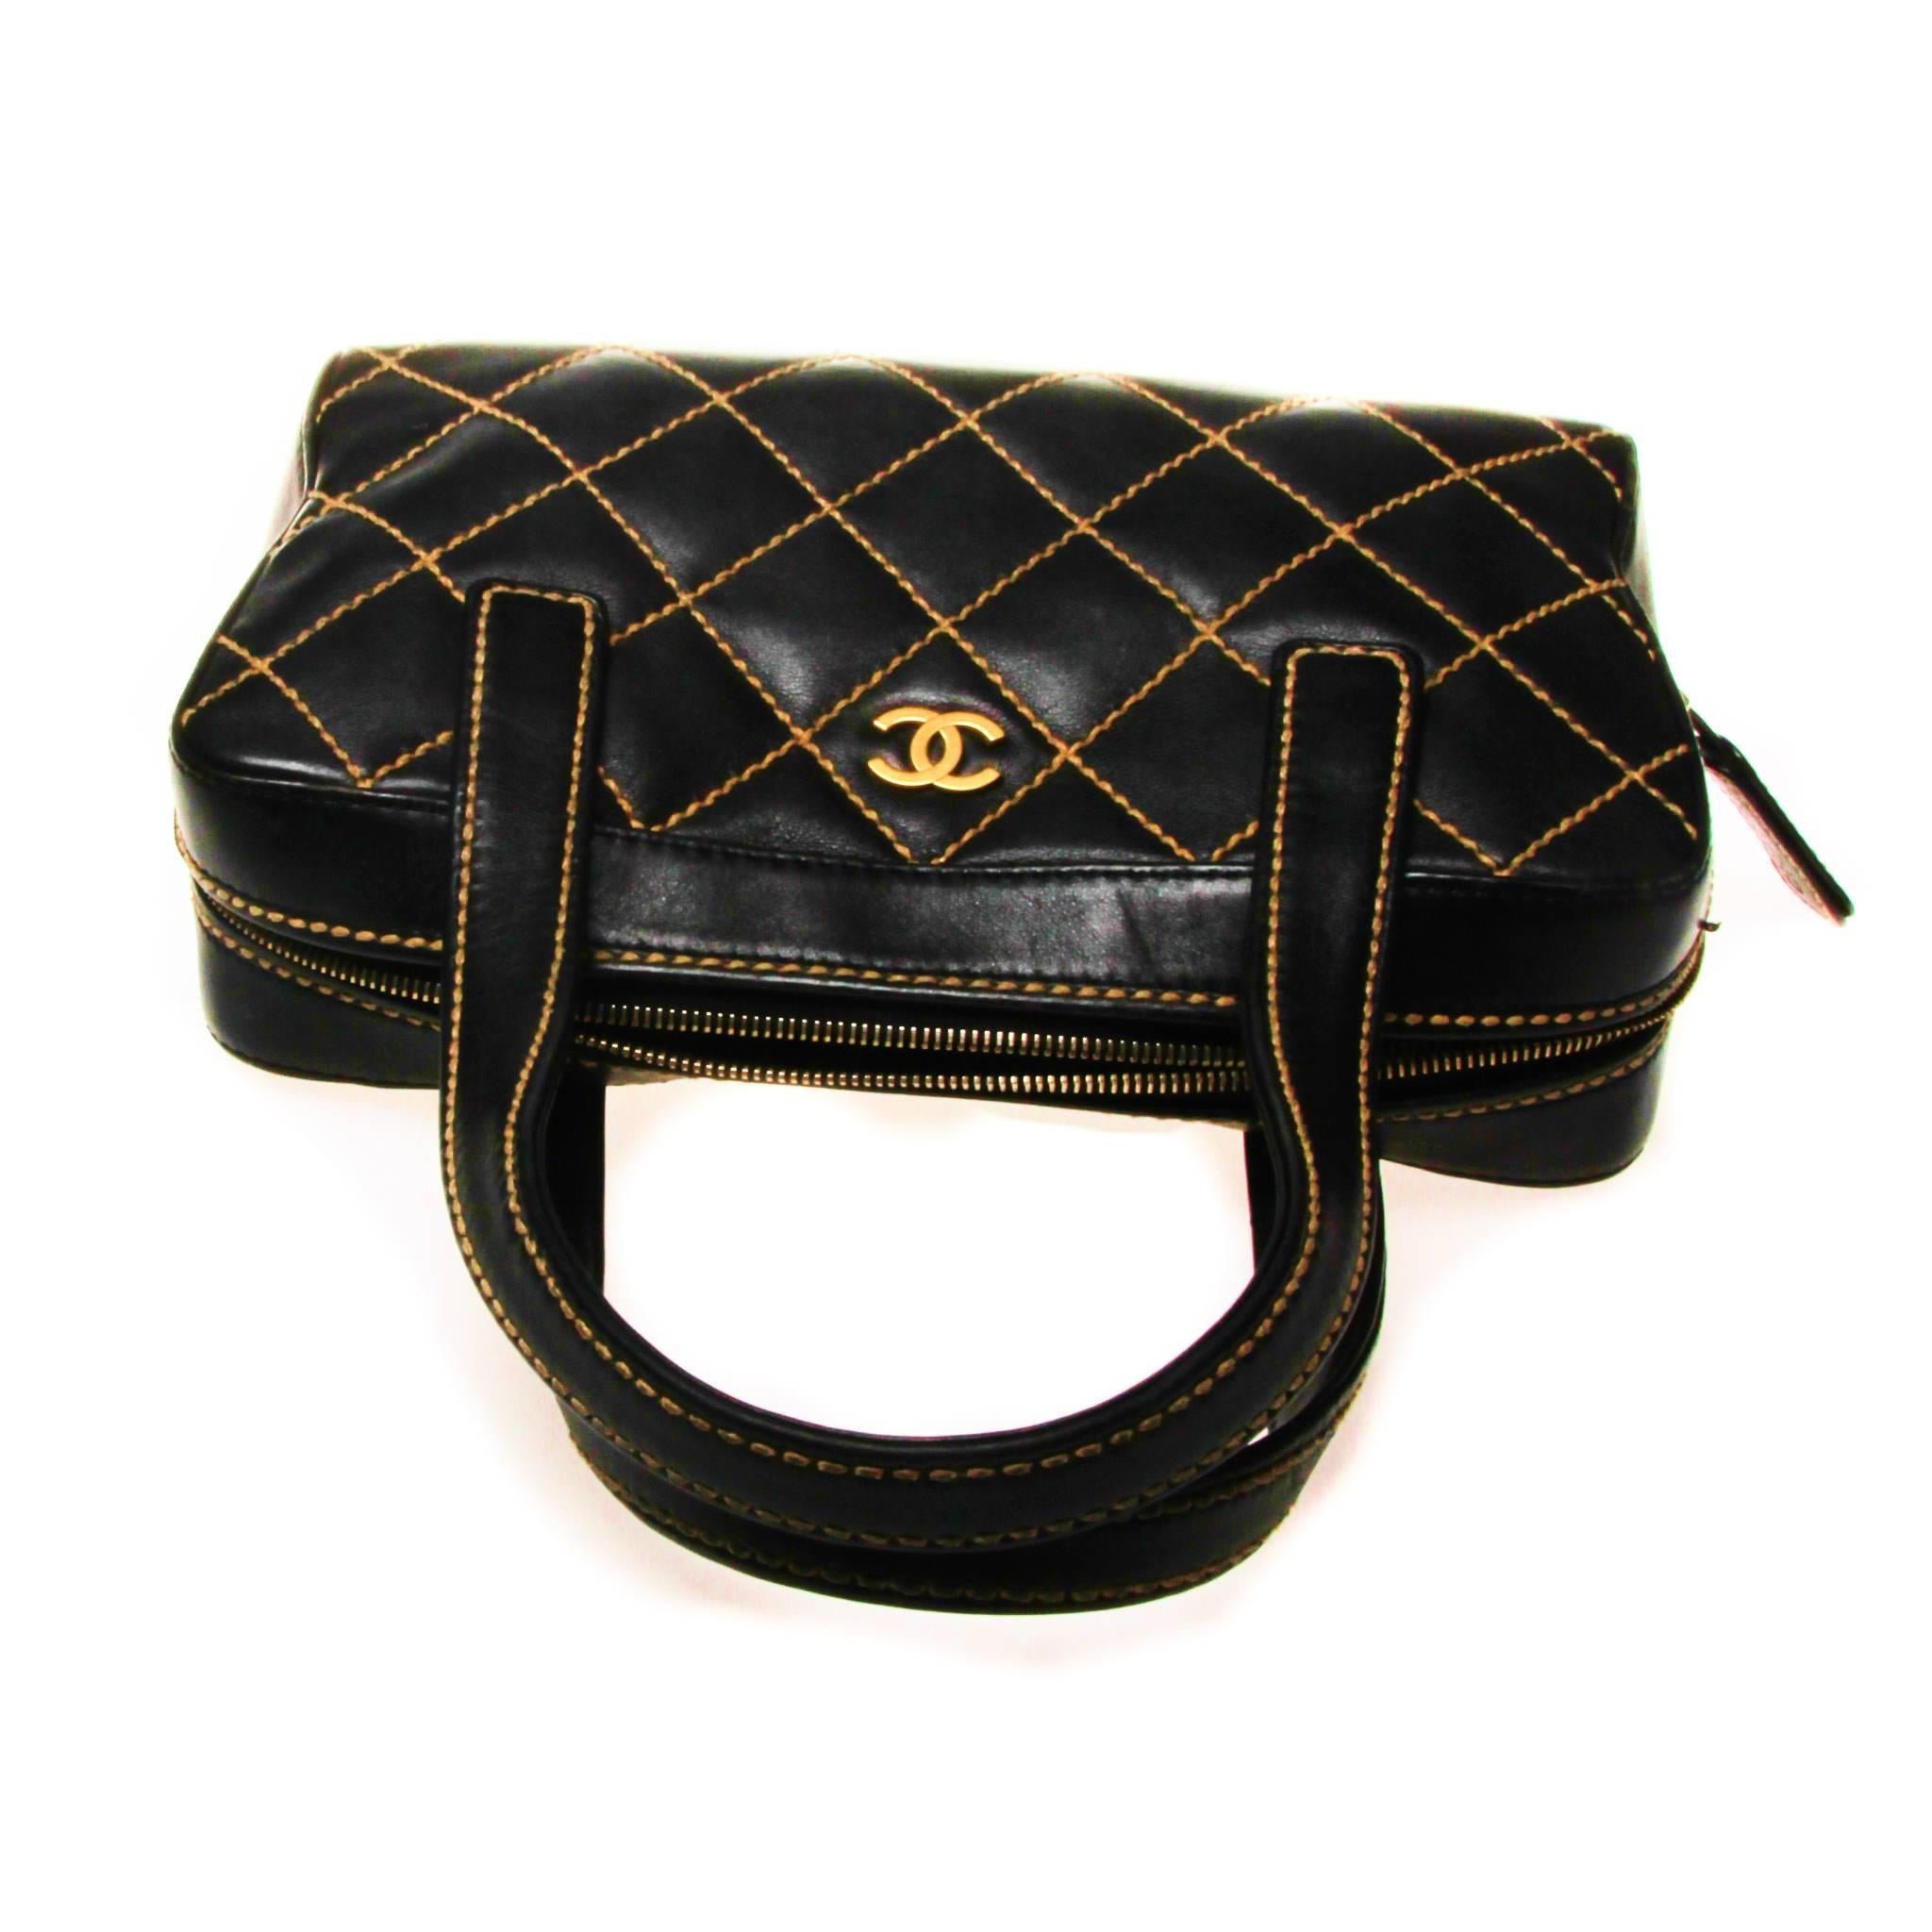 Black CHANEL Quilted Top stitched Top Handle Bag